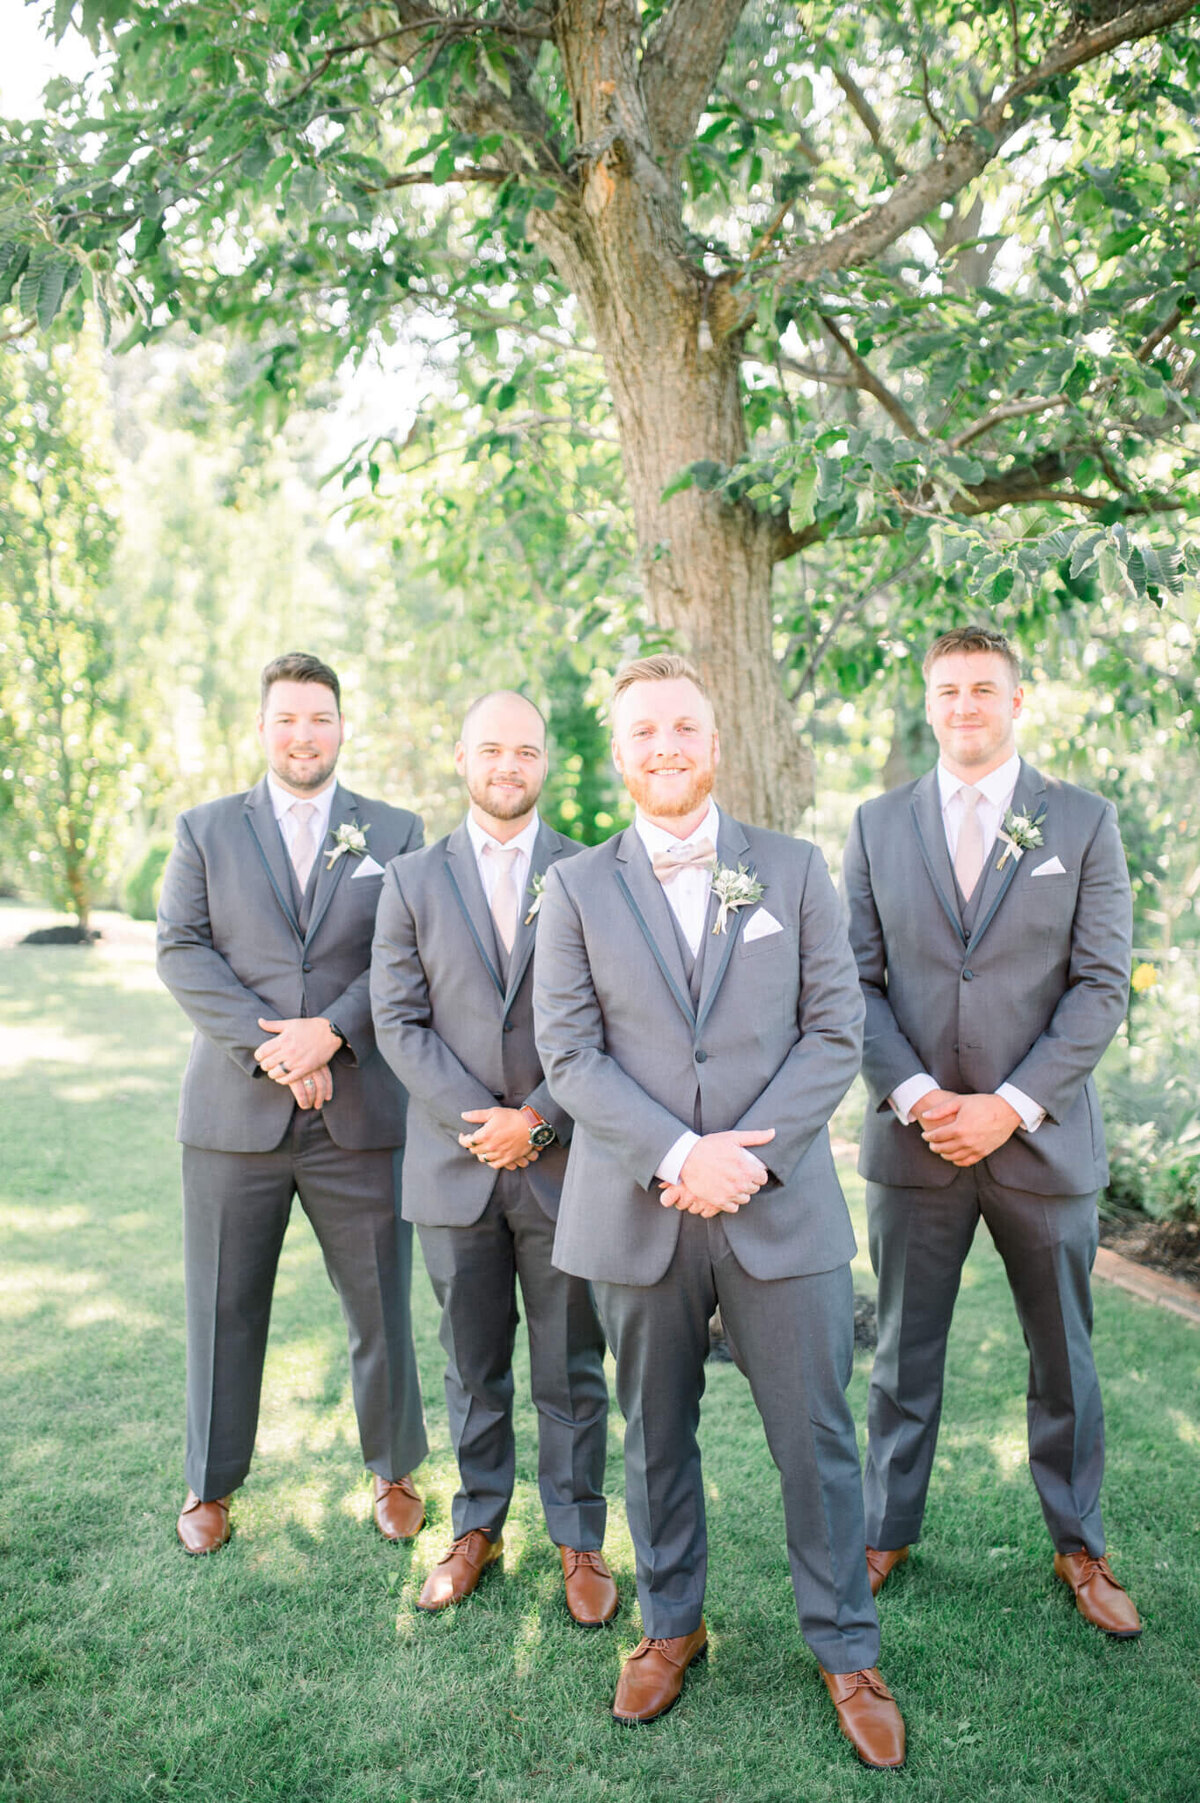 Groom standing at the front of the  V for groomsmen portrait